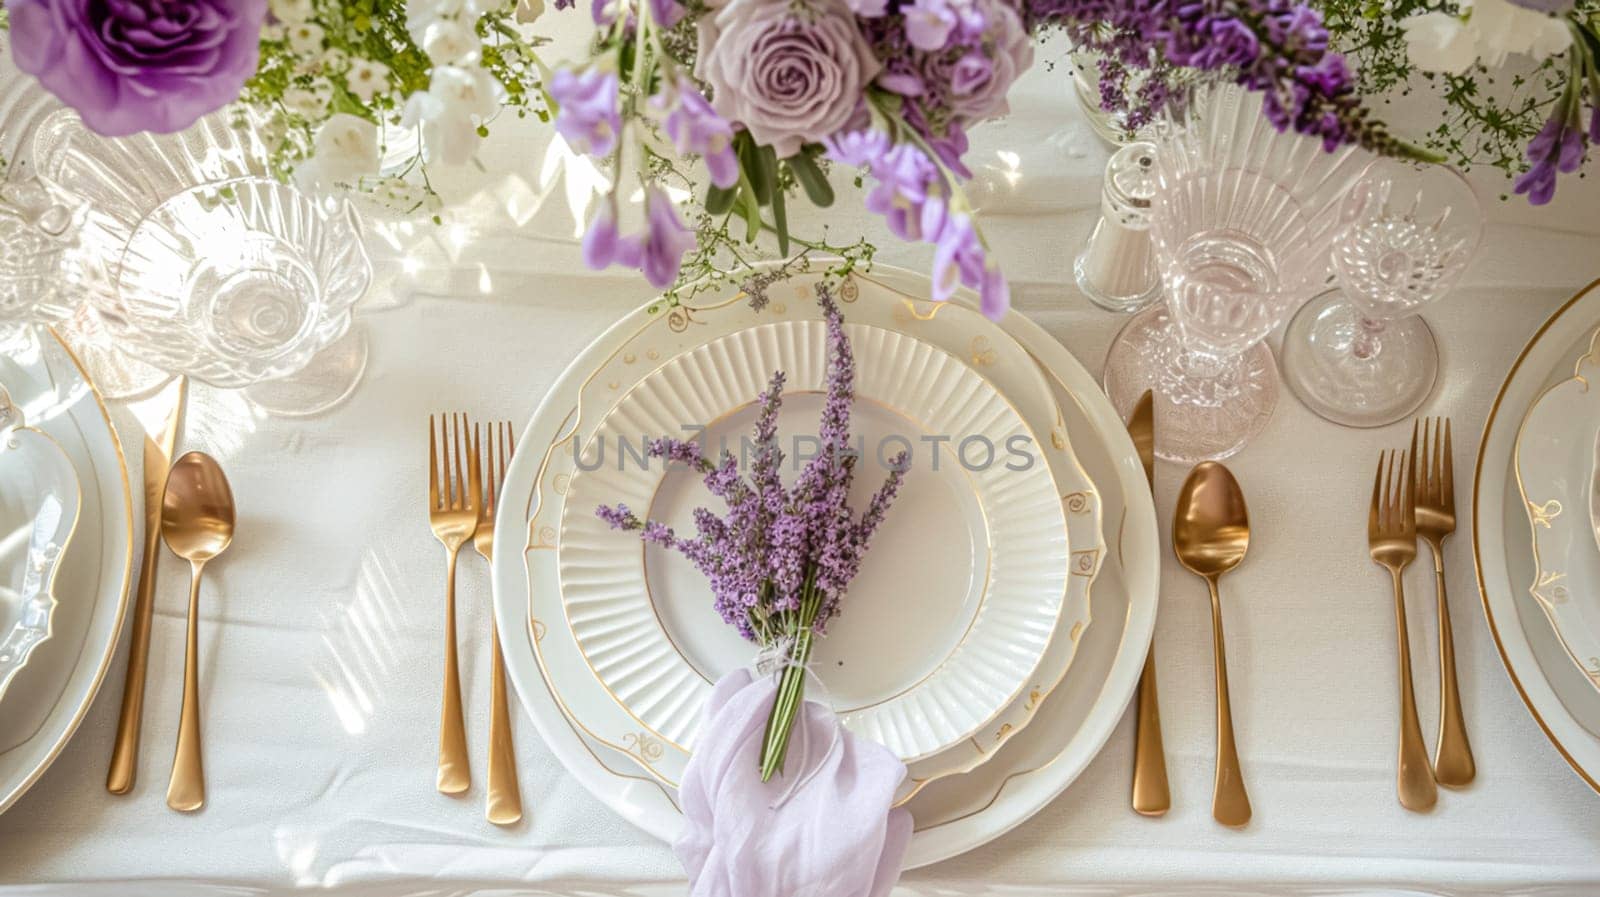 Wedding table decoration with lavender flowers, sweets and cake by Olayola